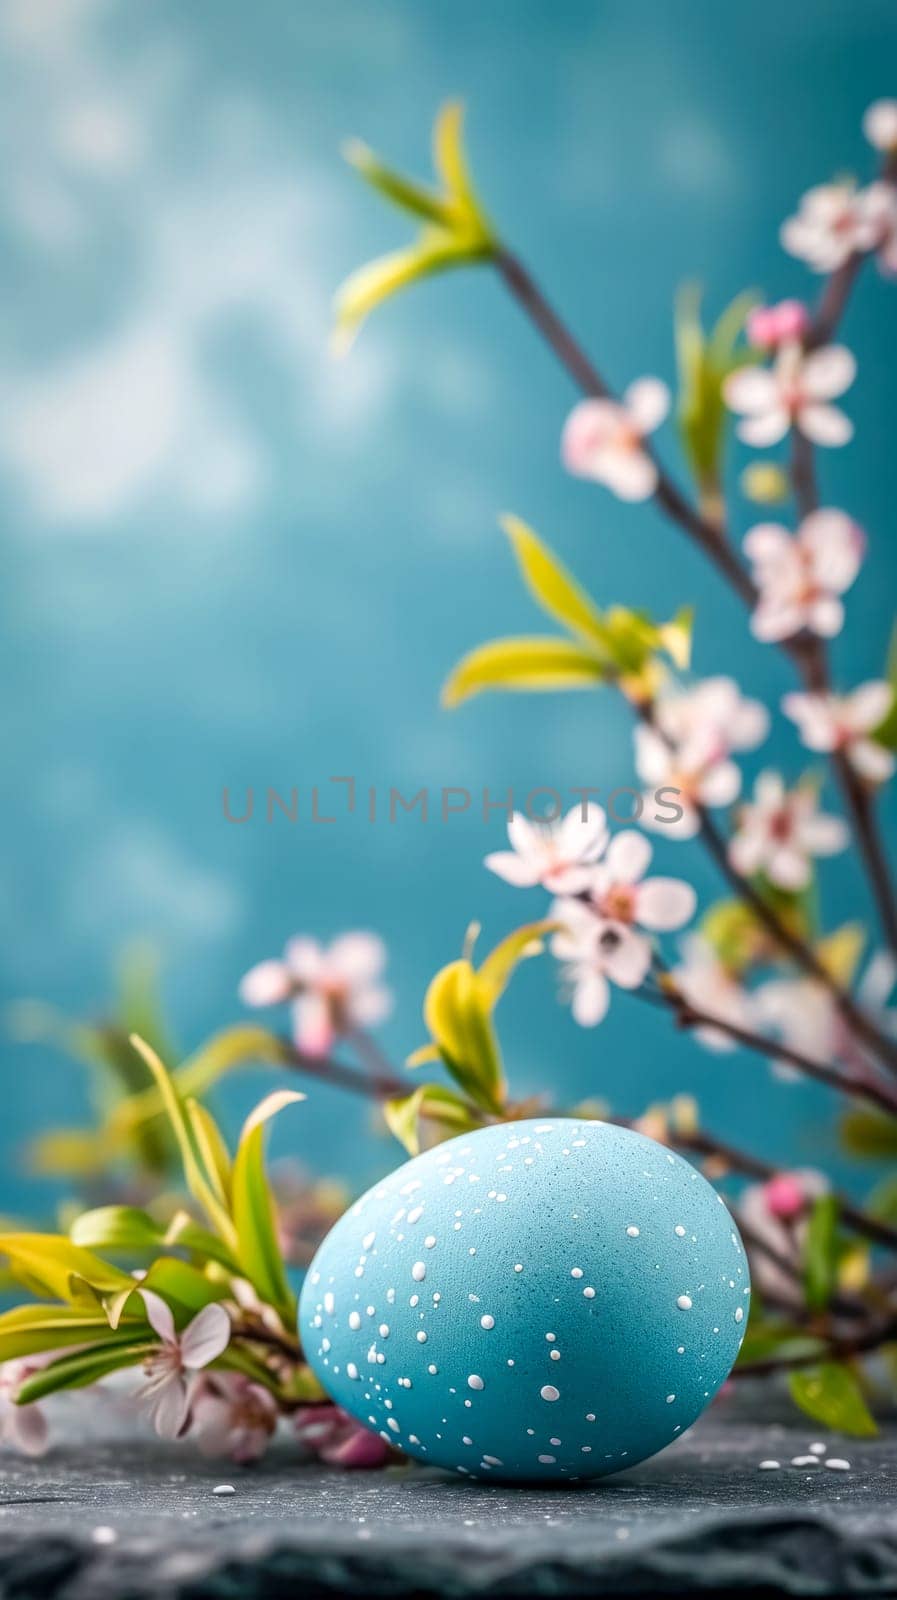 Easter egg in a shade of sky blue with delicate white speckles, set against a soft focus backdrop of spring blossoms, conveying a sense of freshness and the joy of the Easter season, vertical